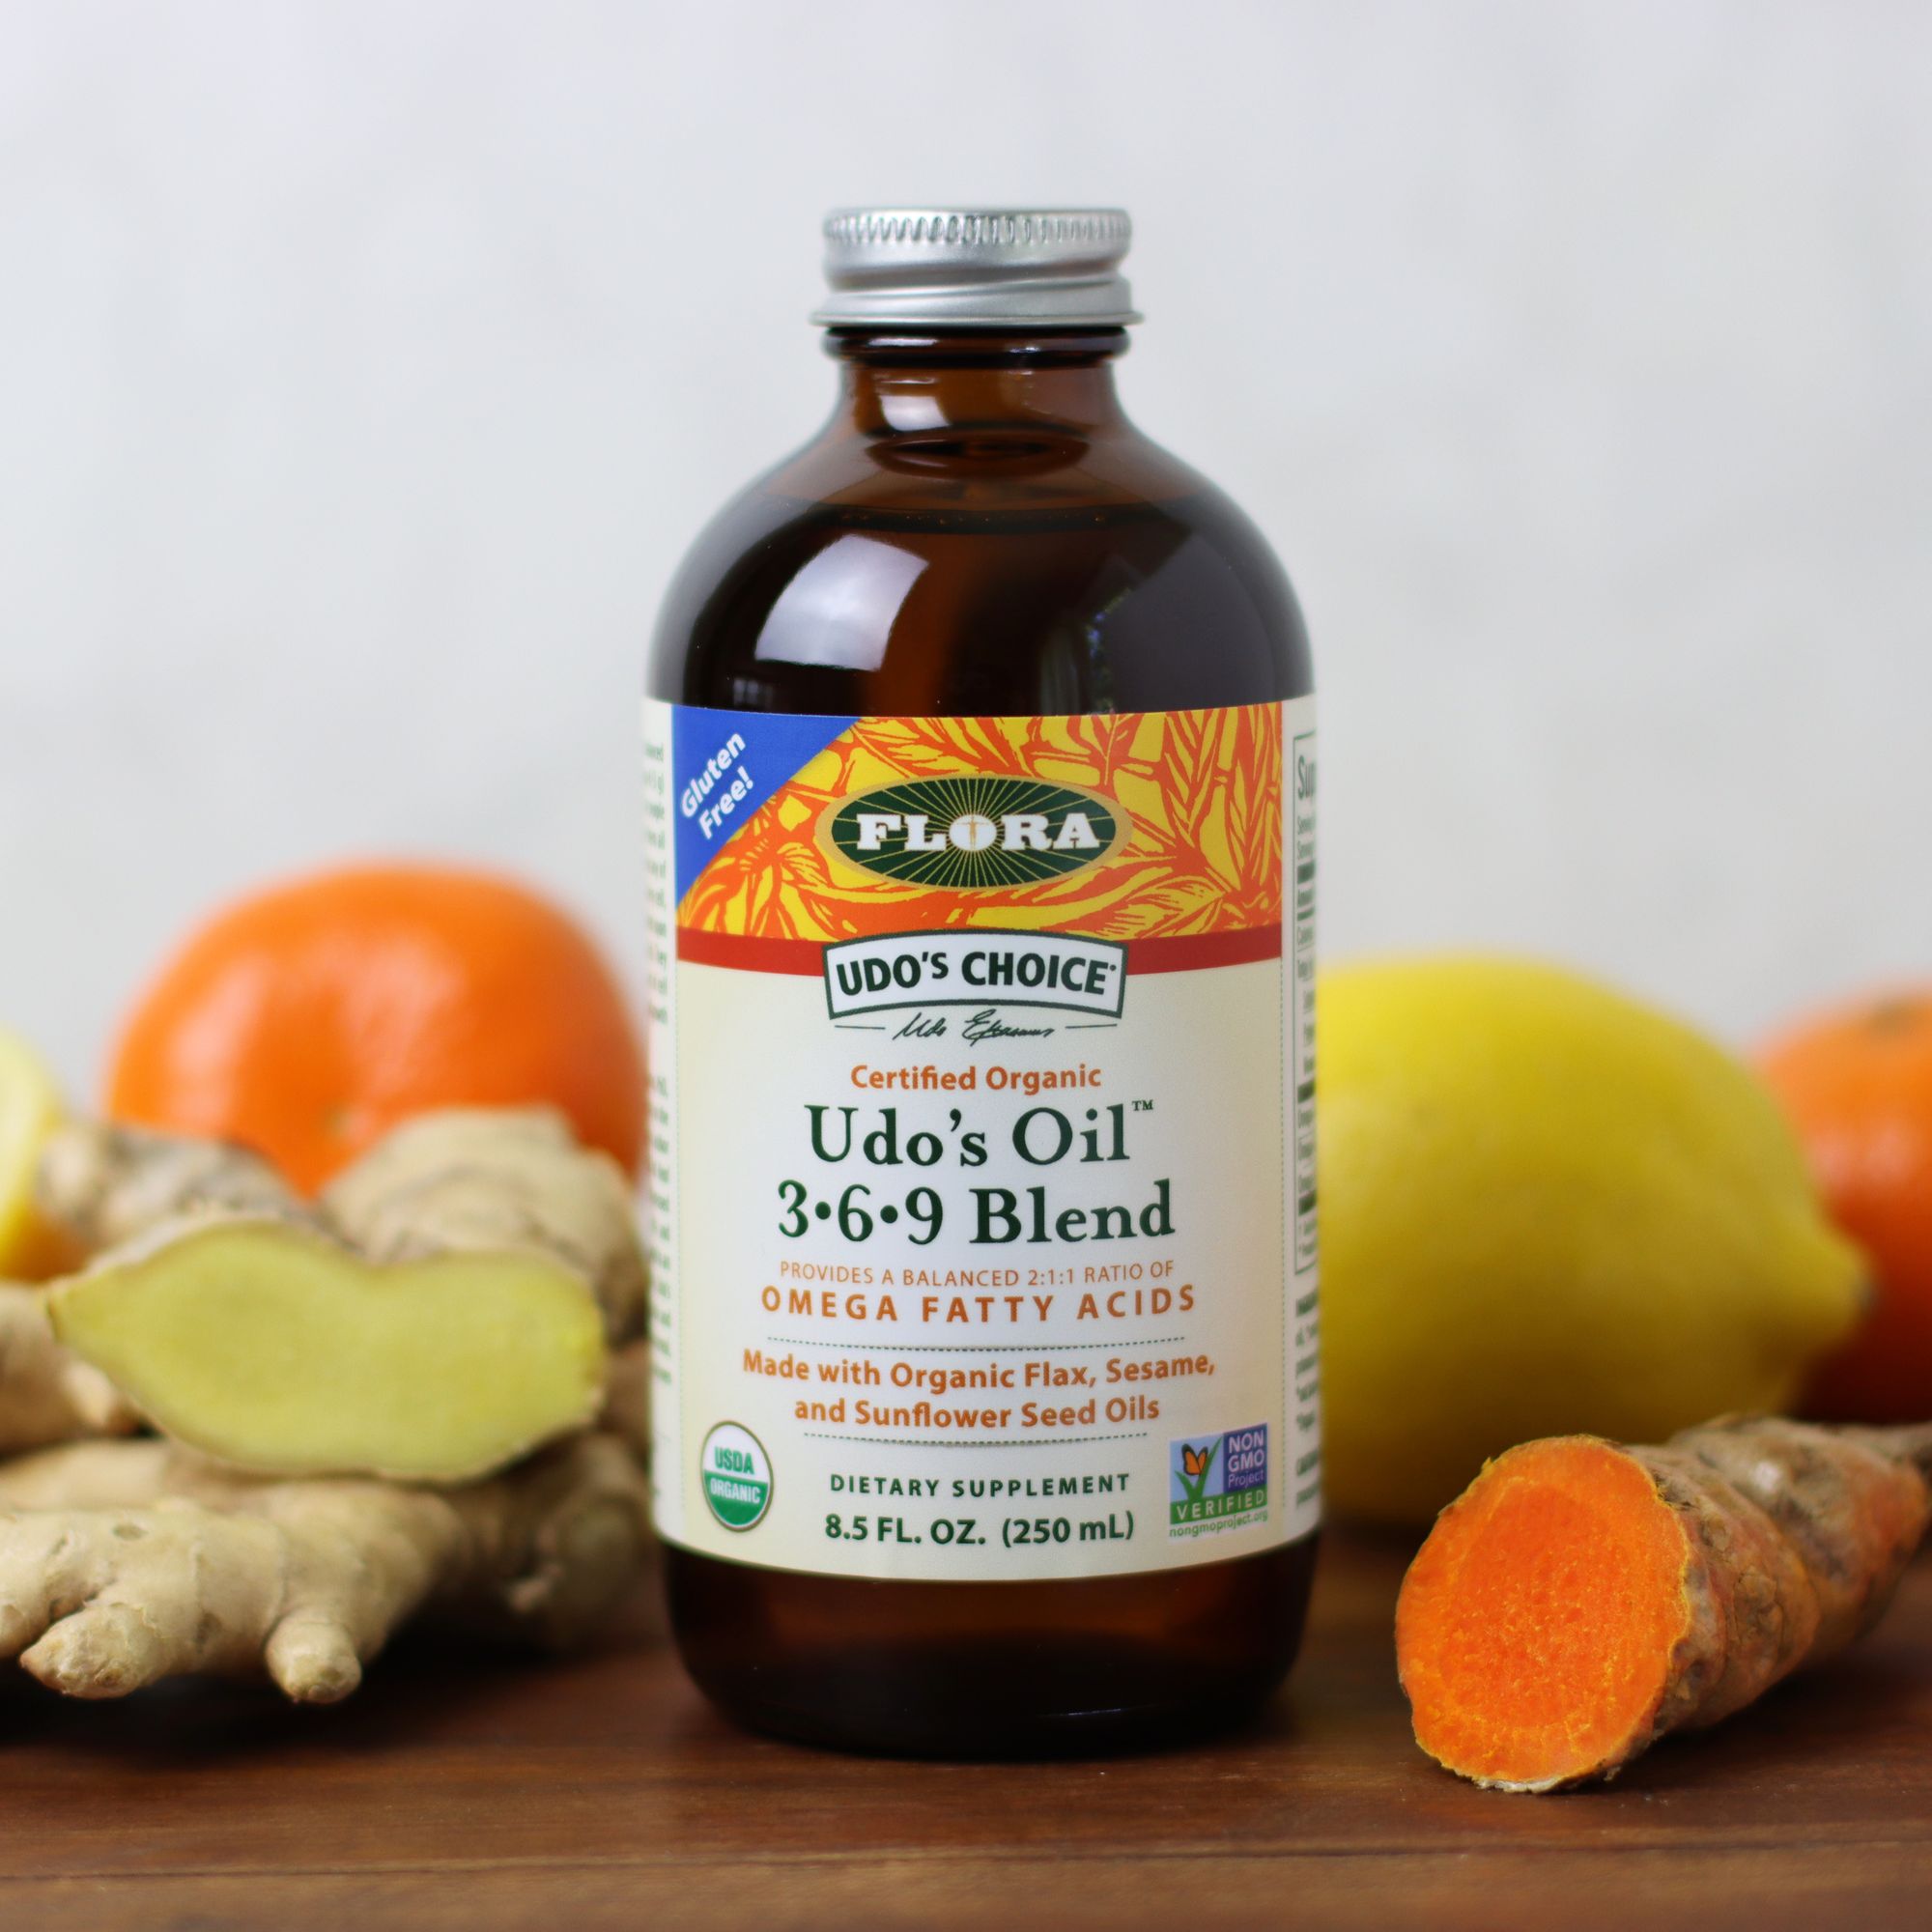 Udos Oil 369 Blend from Flora